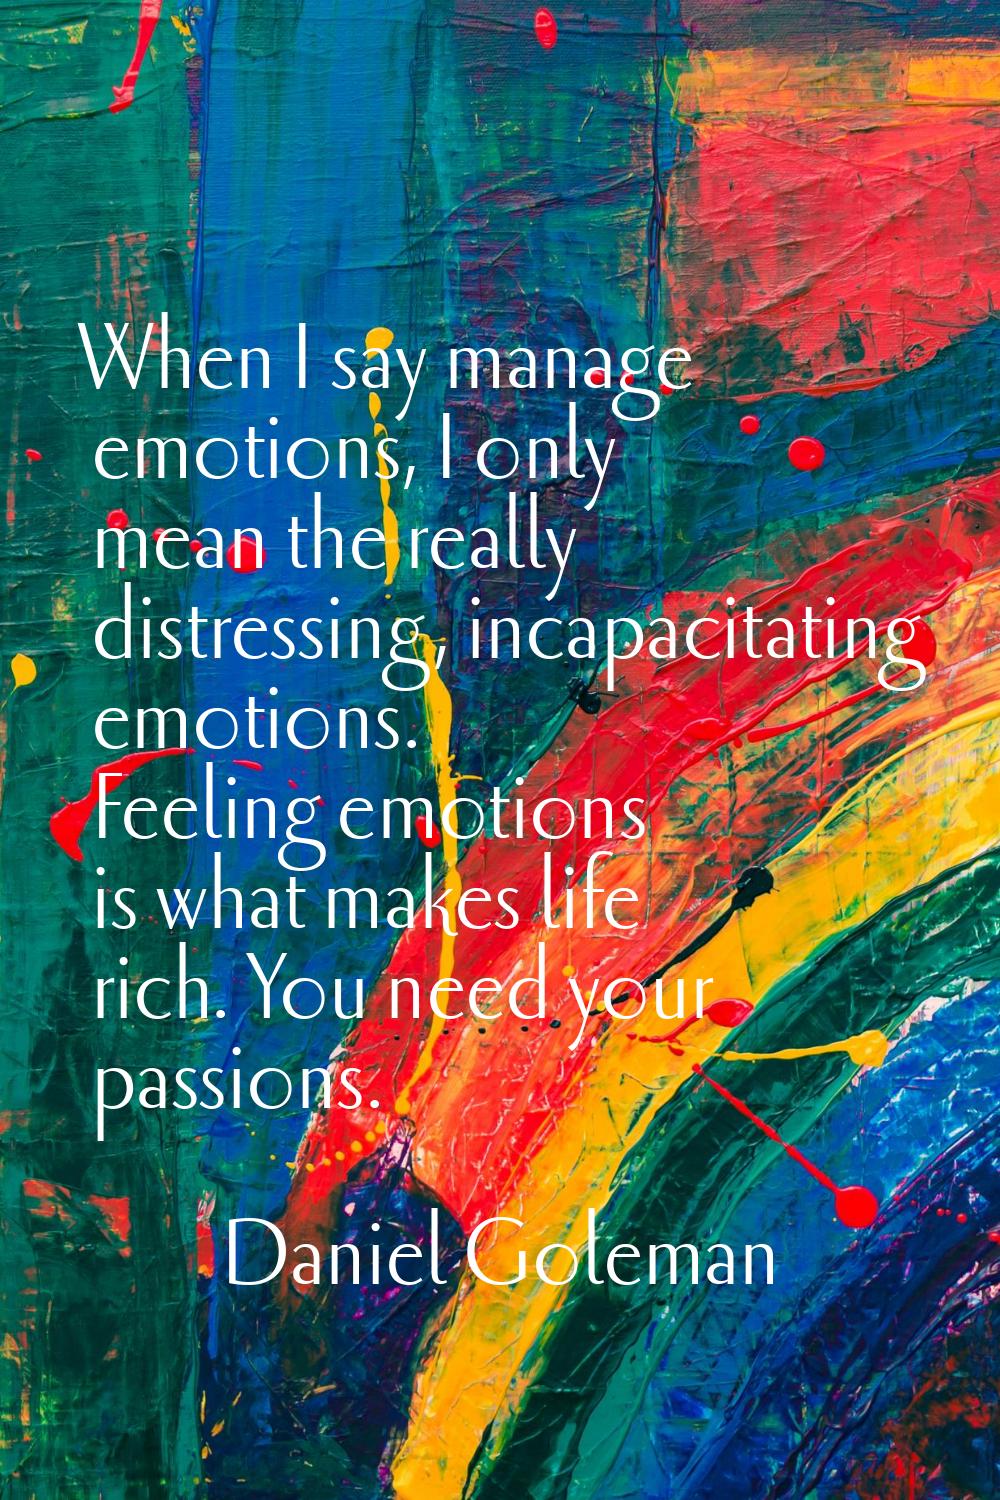 When I say manage emotions, I only mean the really distressing, incapacitating emotions. Feeling em